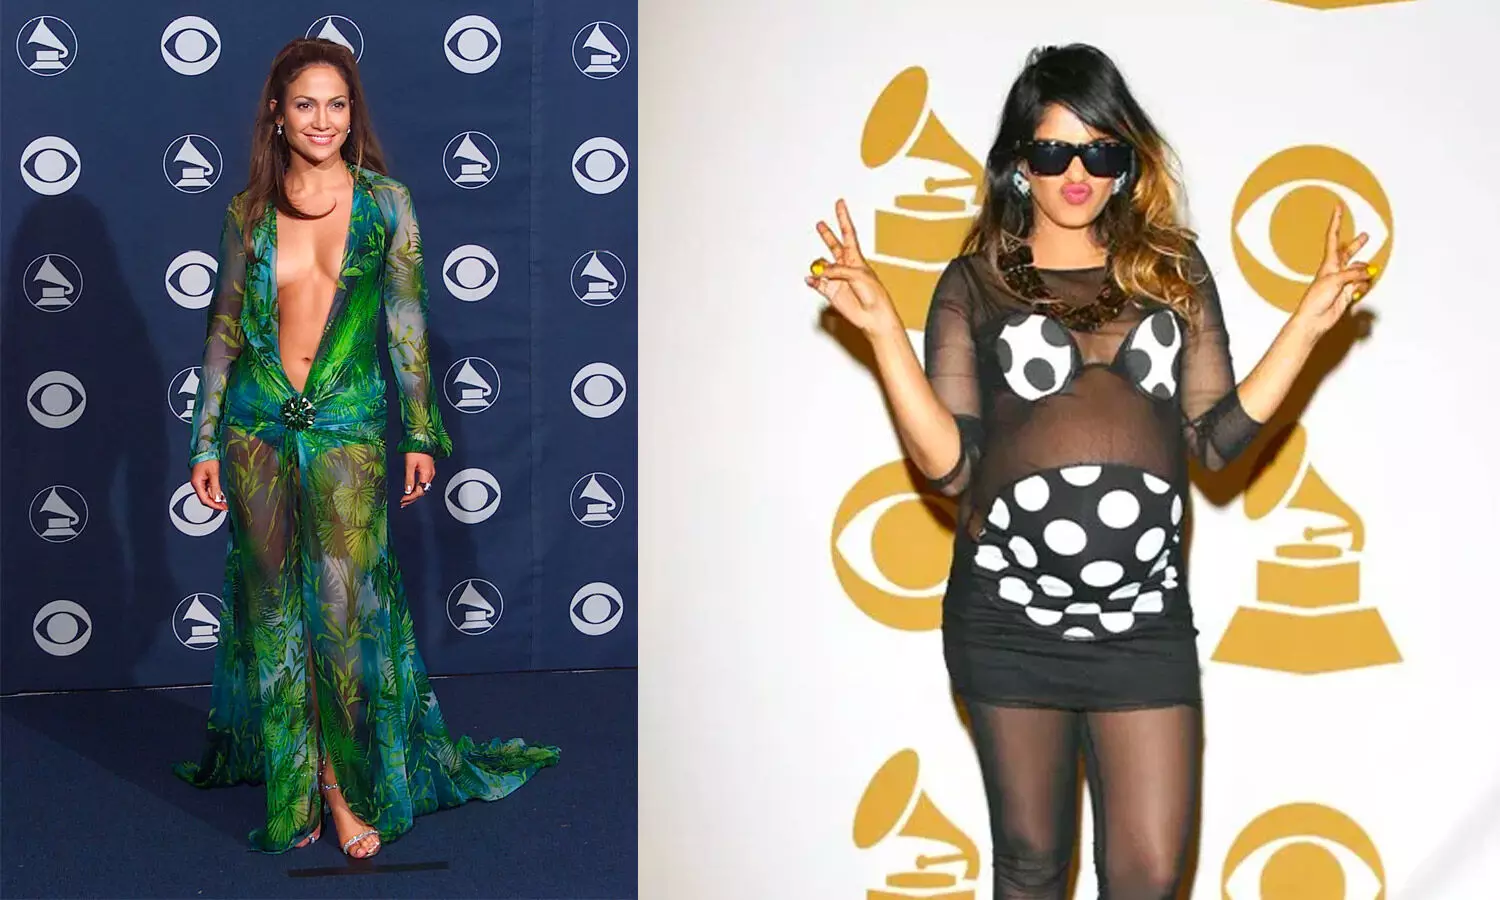 Grammys Greatest Hits: From Jennifer Lopezs Dress to M.I.A.s Bump, 5 Unforgettable Moments